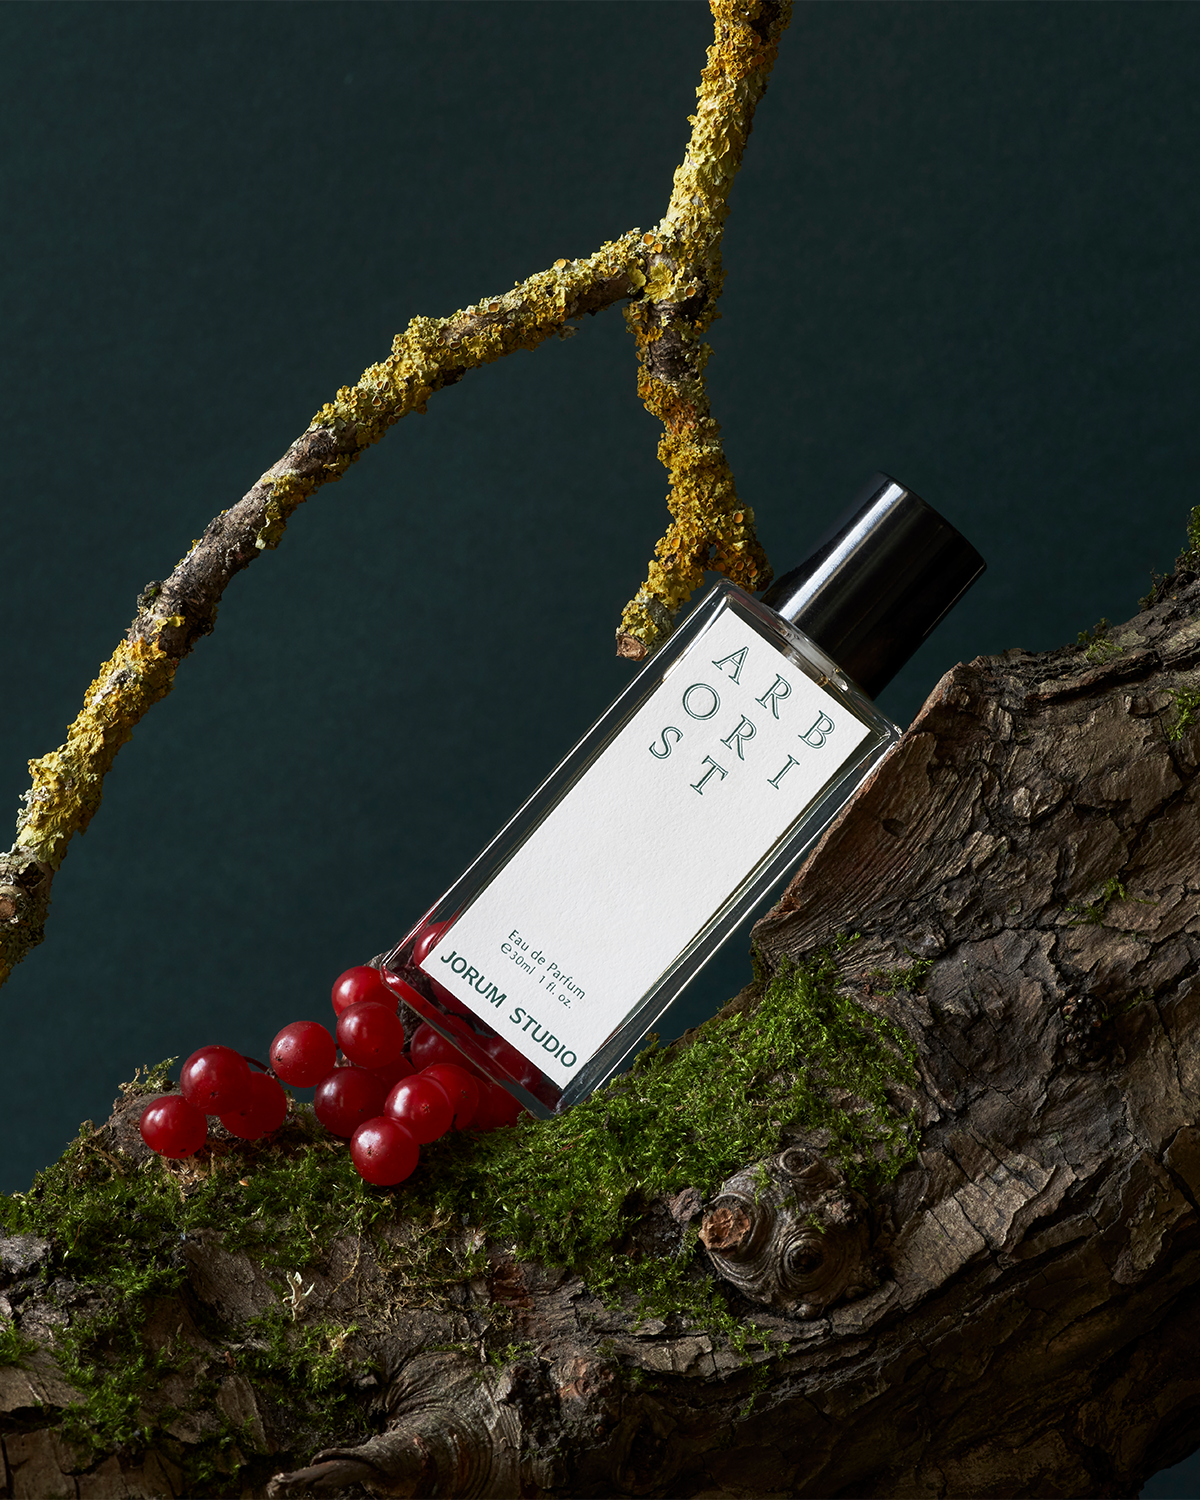 Bottle of Arborist Eau de Parfum by Jorum Studio, arranged in a still-life featuring a mossy branch and red berries